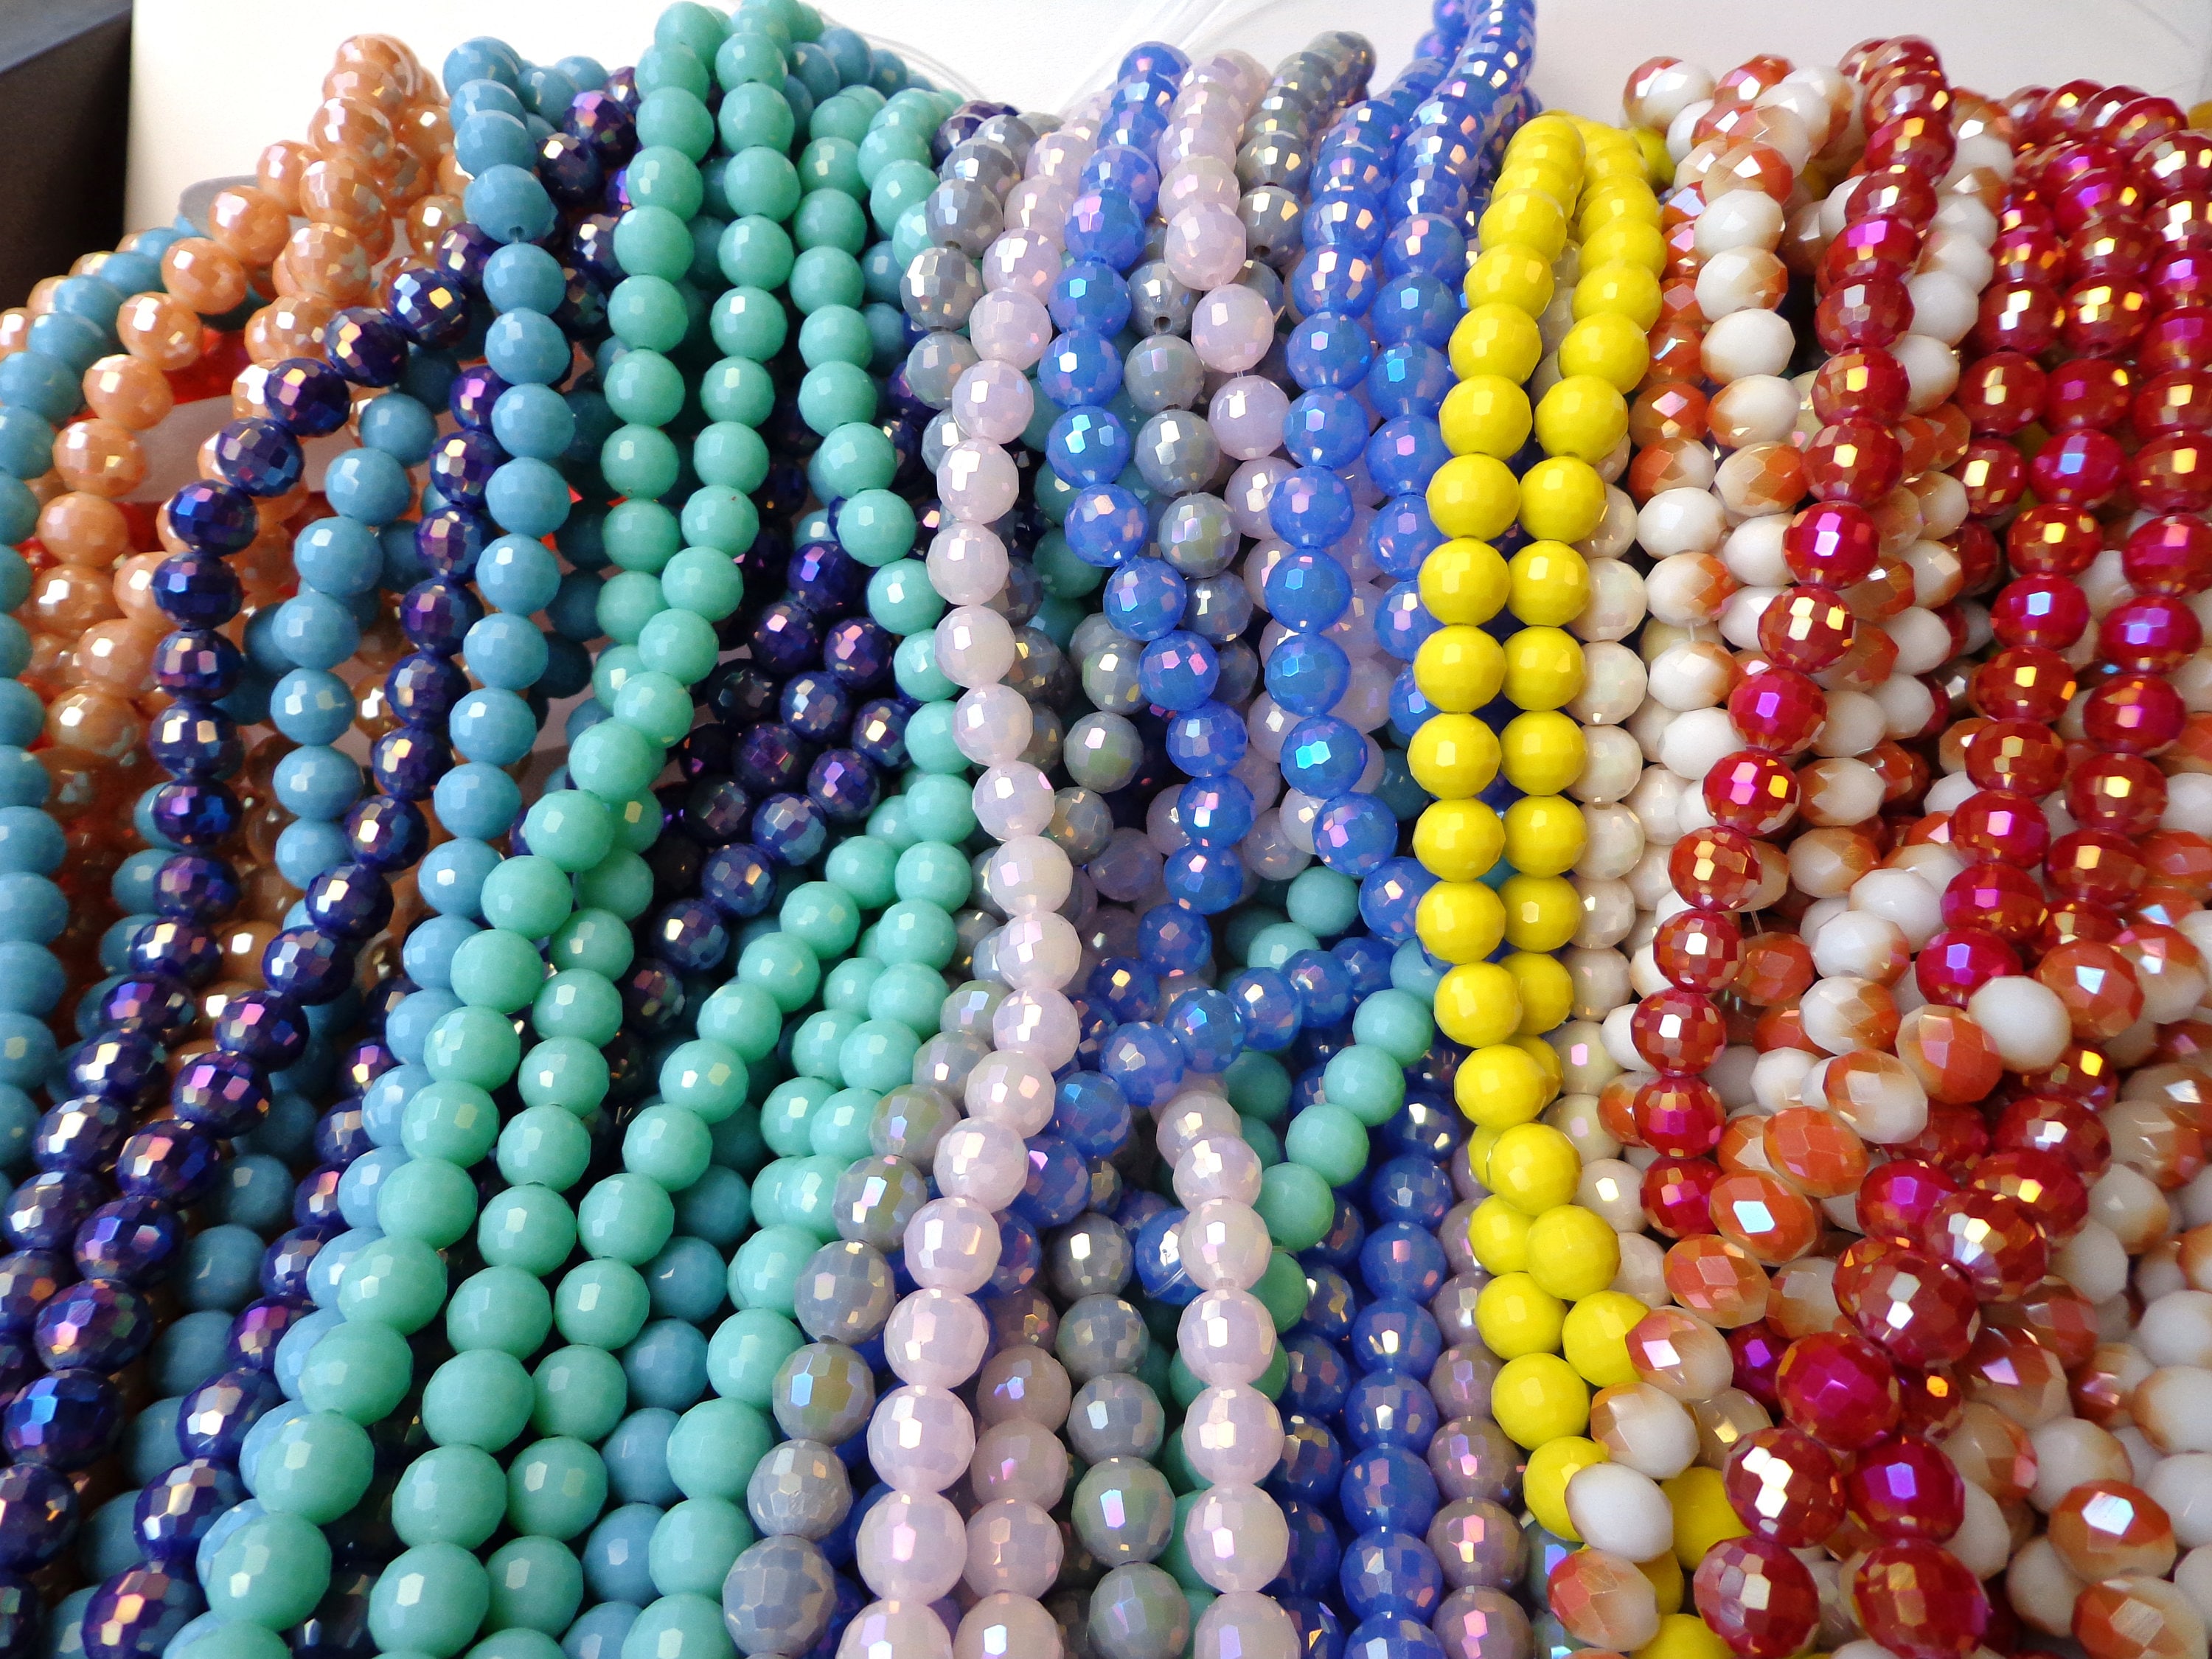 Glass Beads Assorted Glass Beads Assorted Beads 8mm Beads 8mm Glass Beads  BULK Beads Large Lot Mixed Beads Marble Beads 55 Pieces 